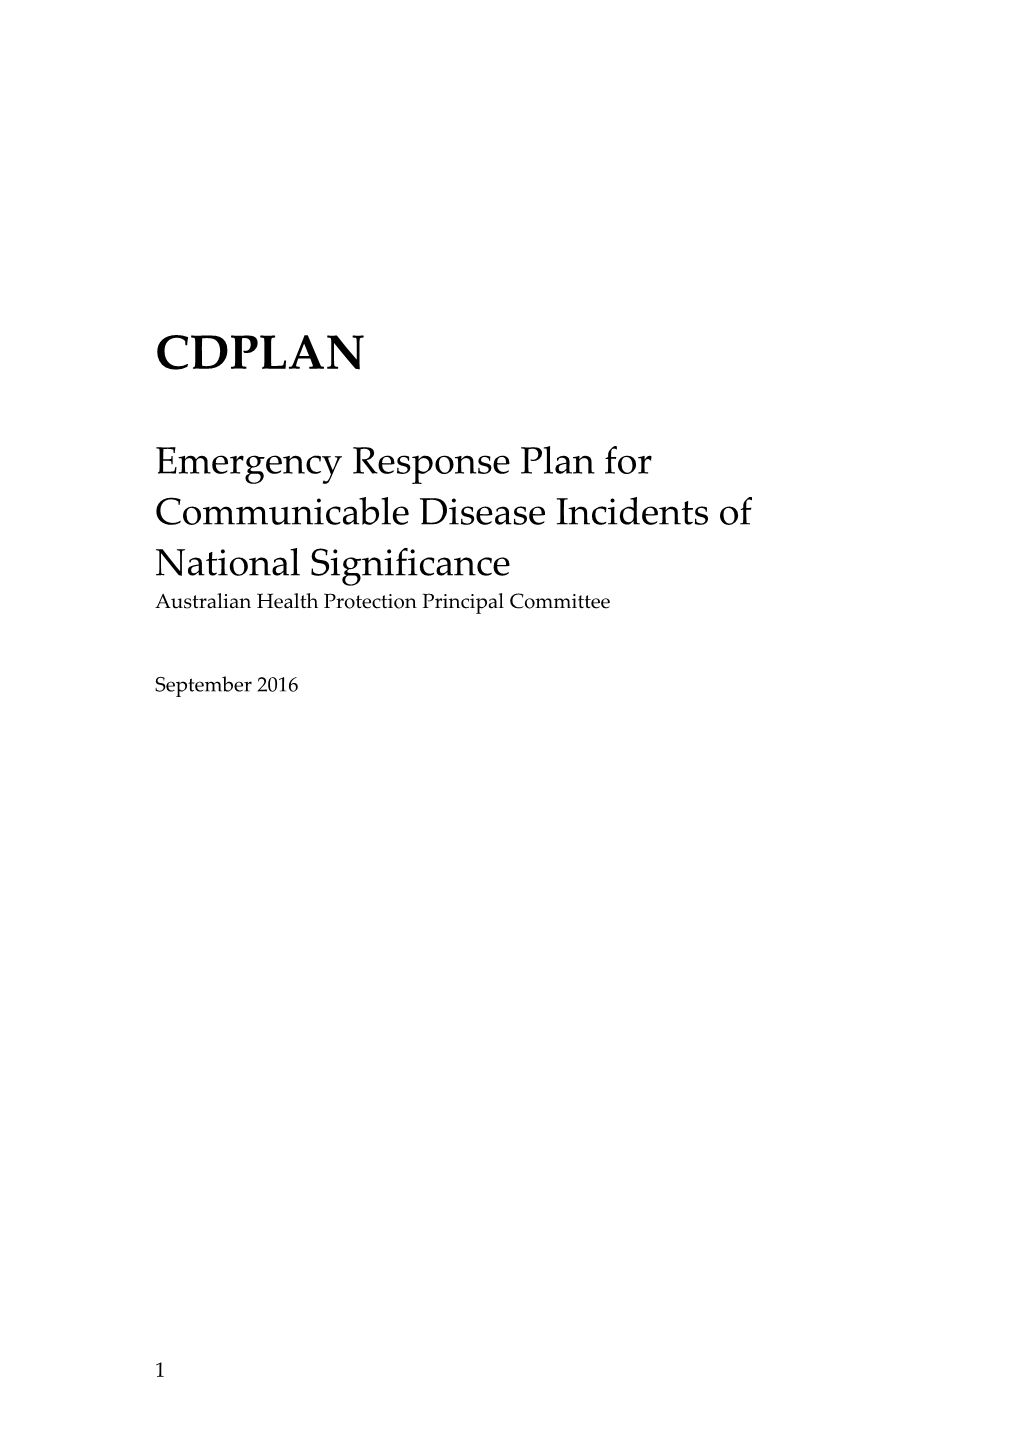 Emergency Response Plan for Communicable Disease Incidents of National Significance